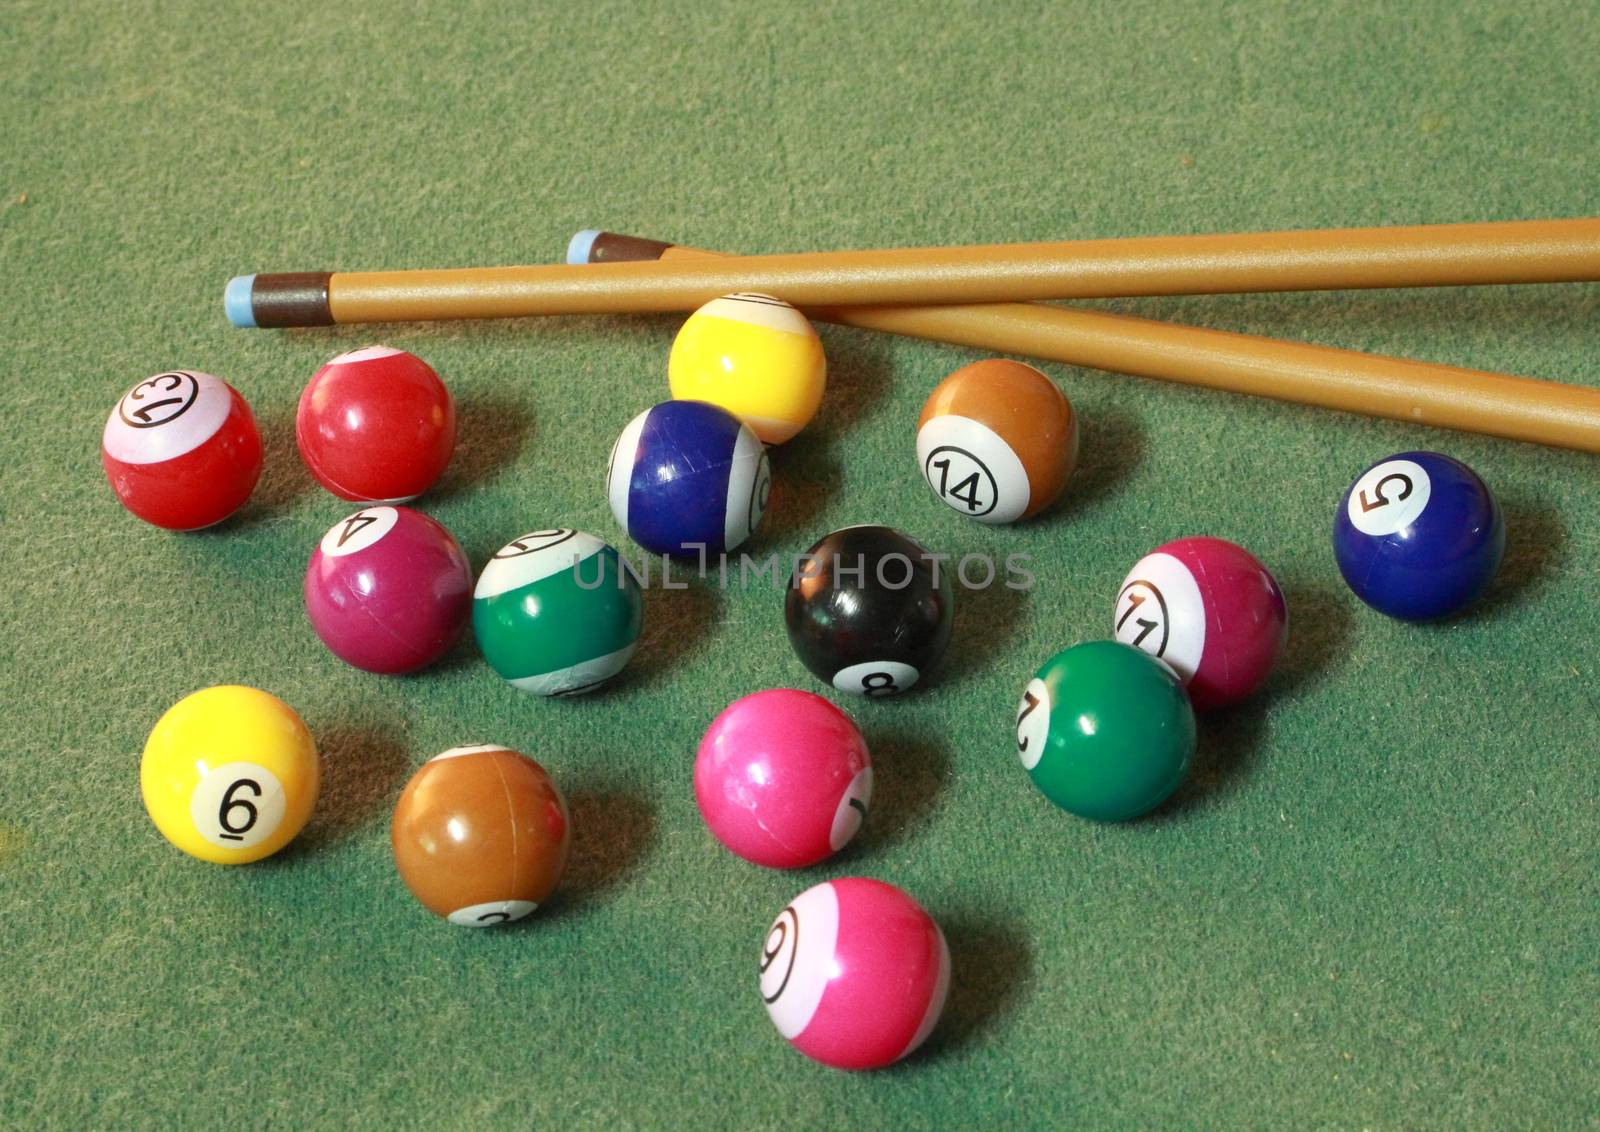 Pool balls on green cloth in disorder with cues